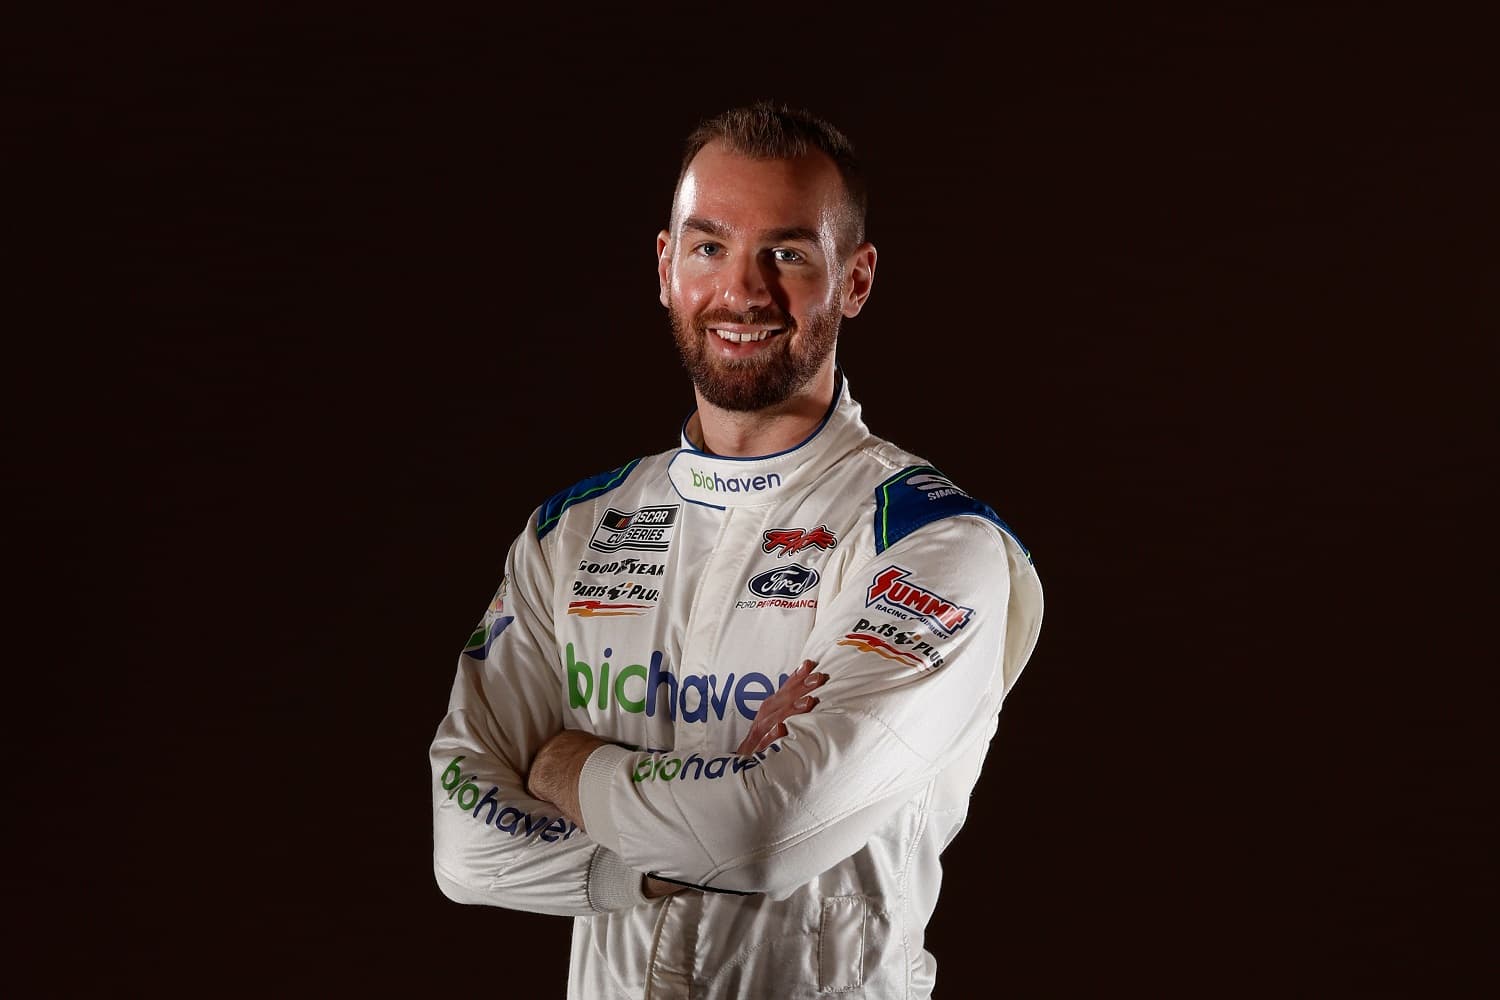 Driver Cody Ware poses for a photo during NASCAR Production Days at Charlotte Convention Center on Jan. 18, 2023, in Charlotte, North Carolina. | Chris Graythen/Getty Images